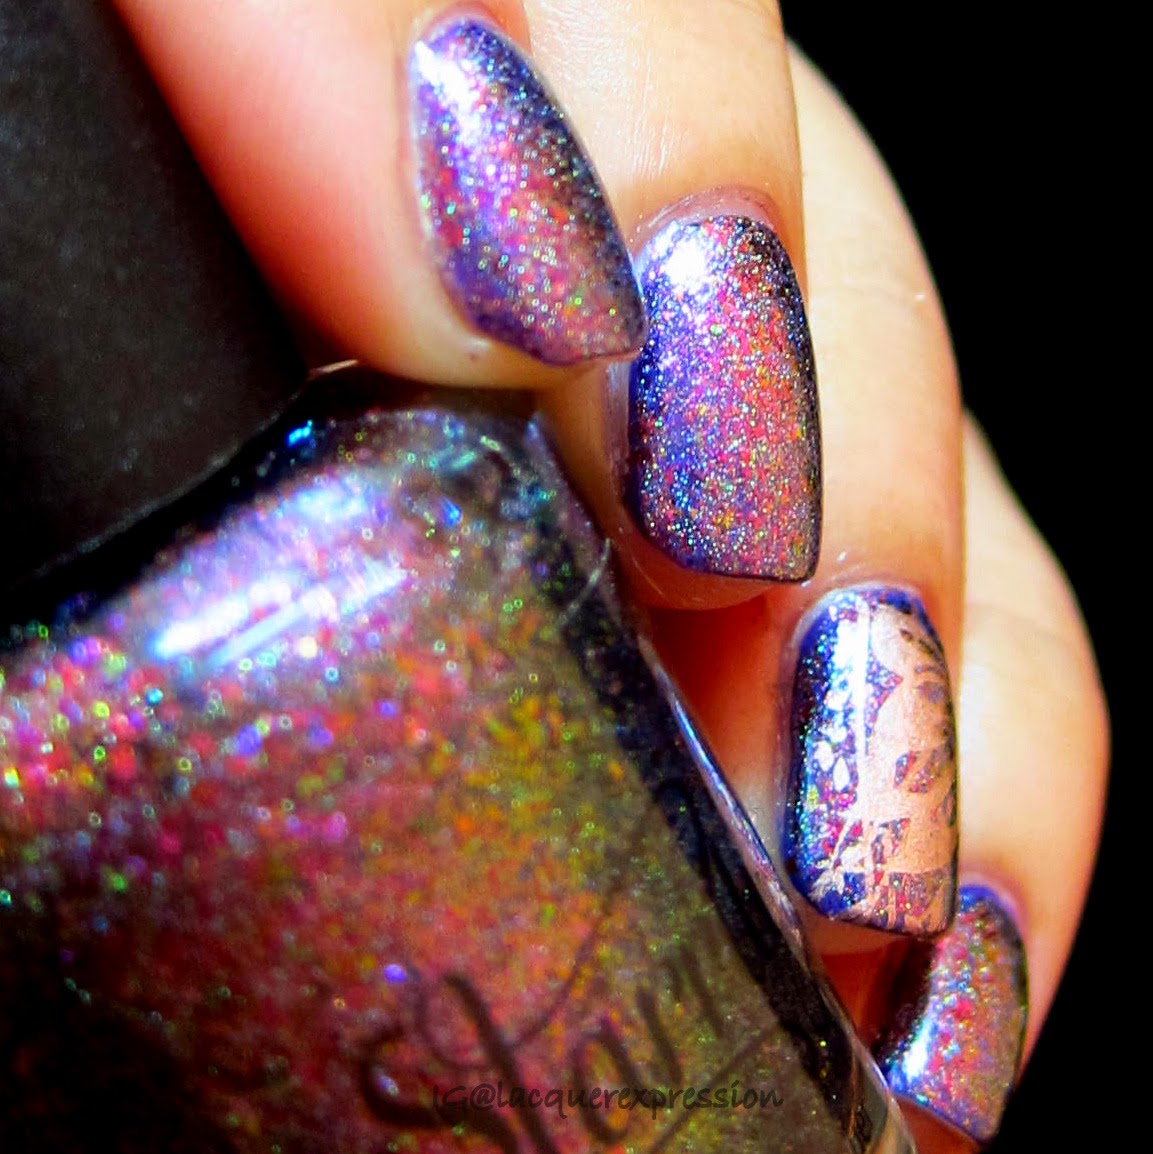 Swatch and review of Supernova Holo nail polish by Starrily